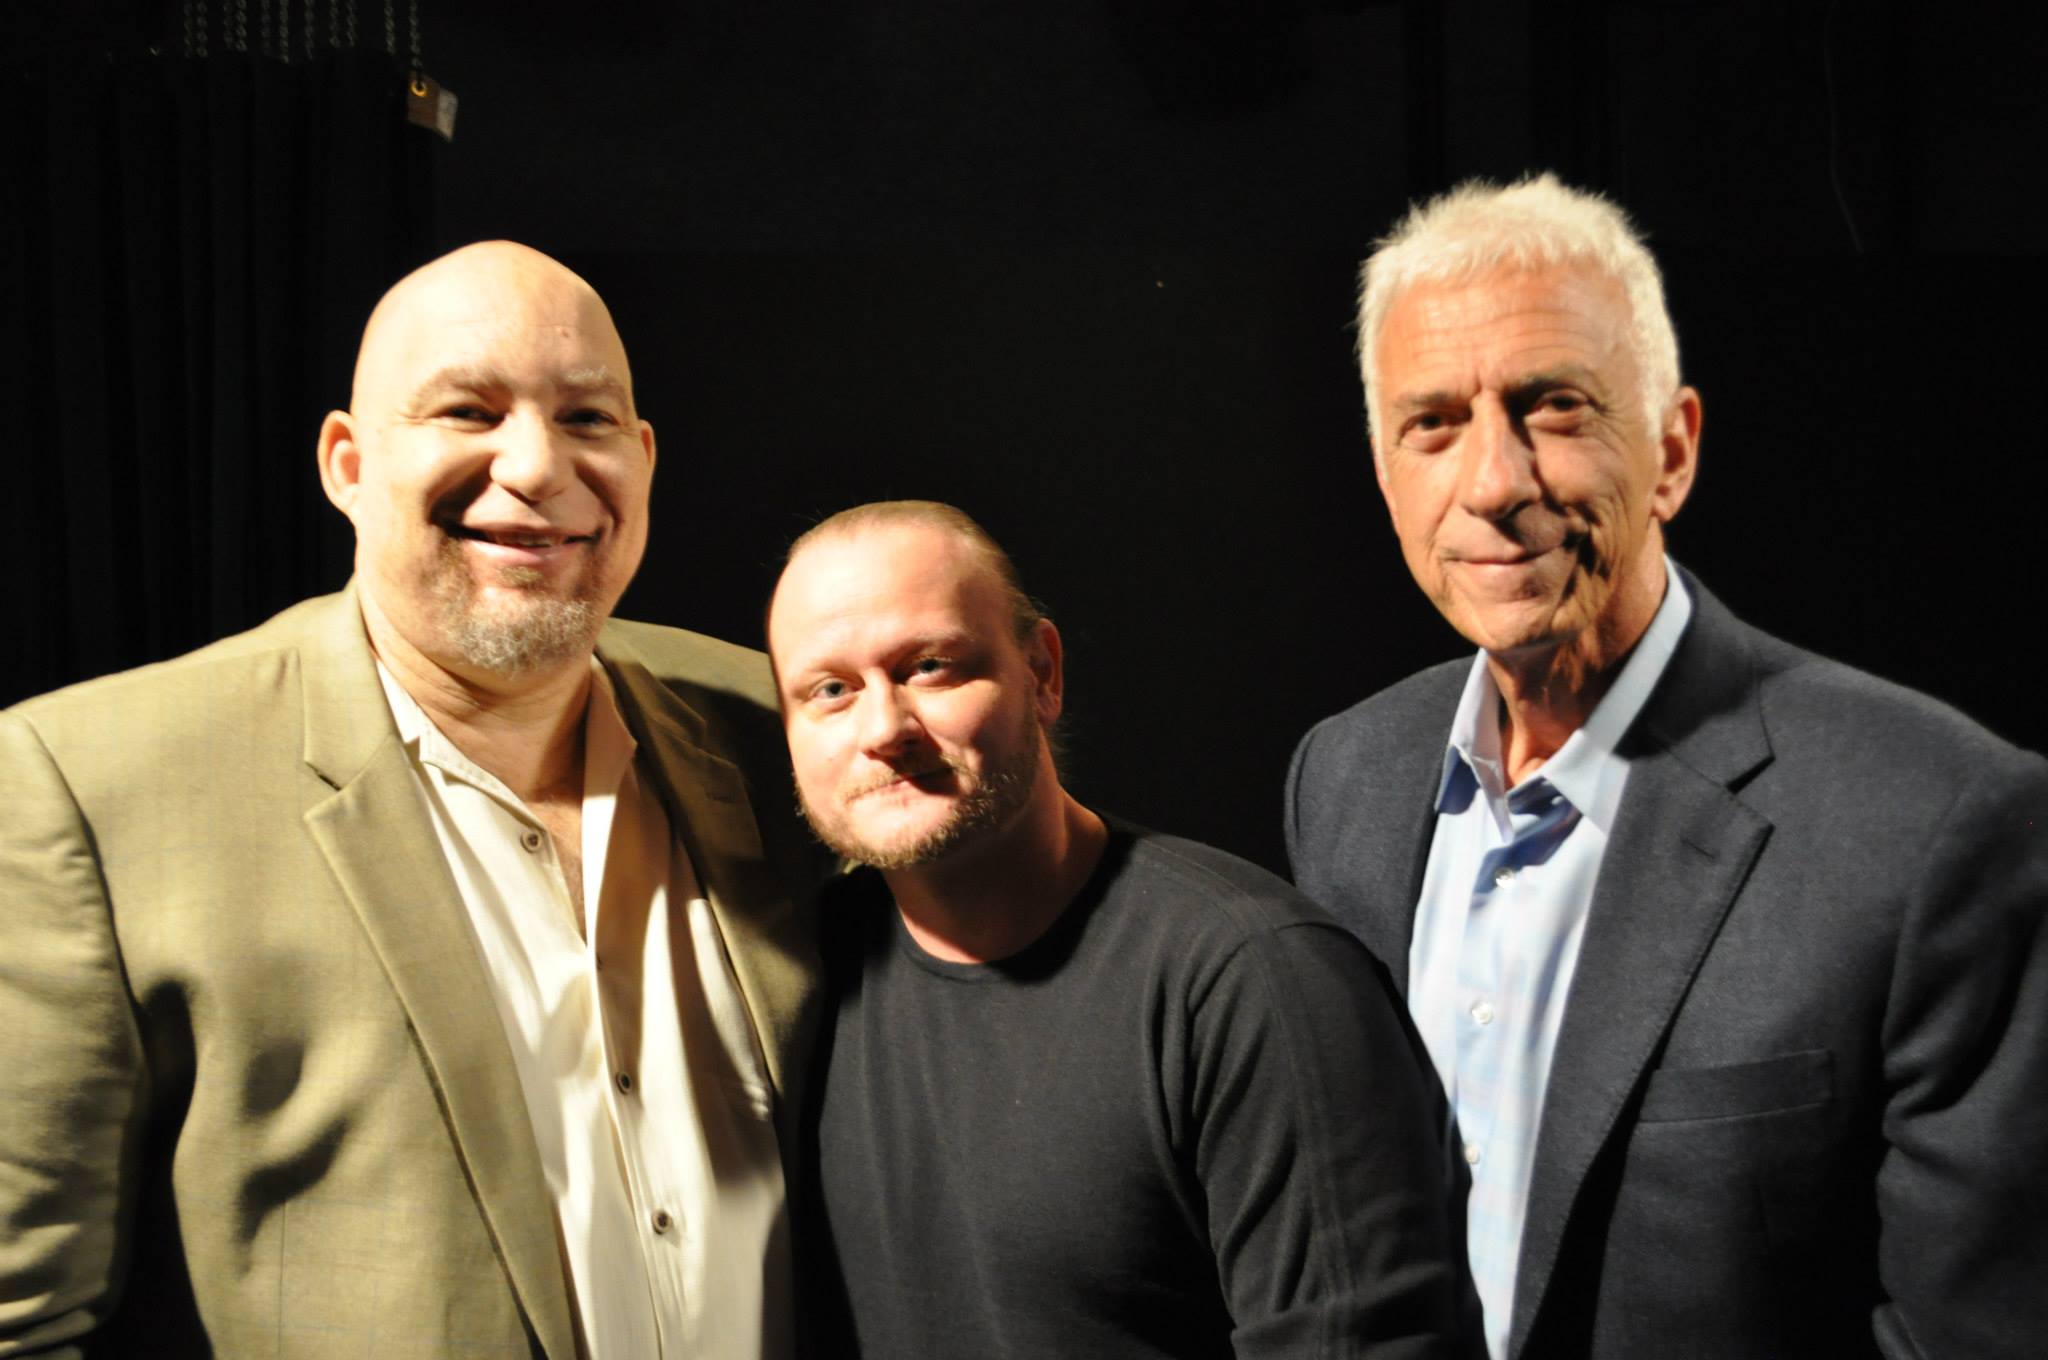 Jeremy Fultz posing with Del Weston of Action on Film Show and fellow director Mark Giardino